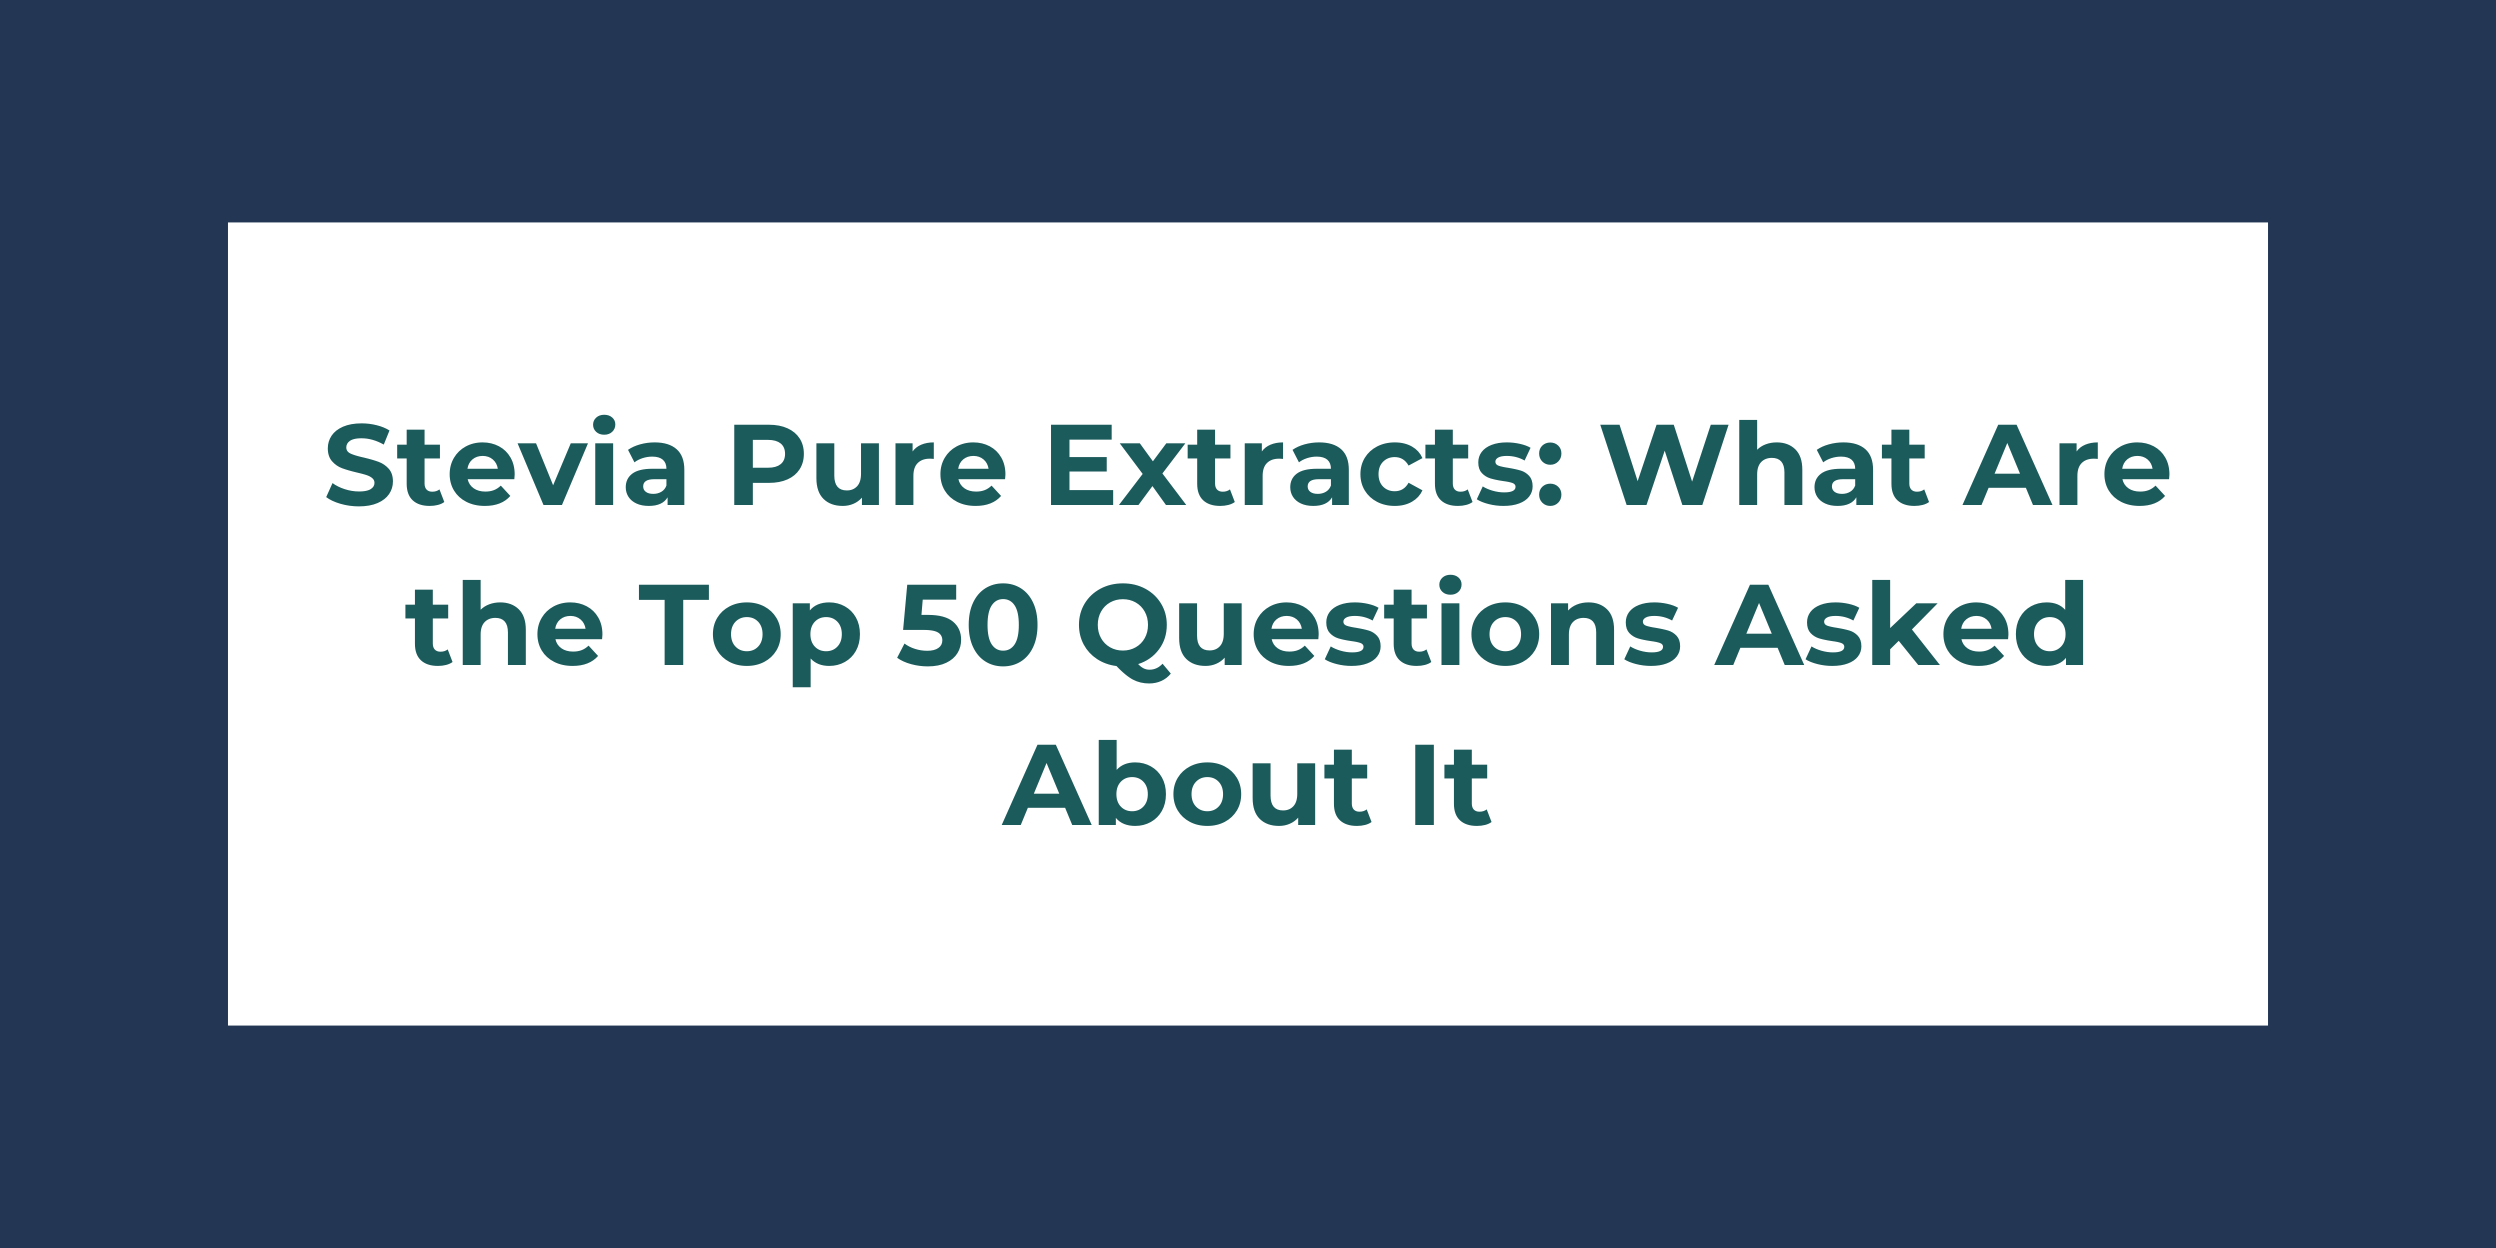 Stevia Pure Extracts: What Are the Top 50 Questions Asked About It